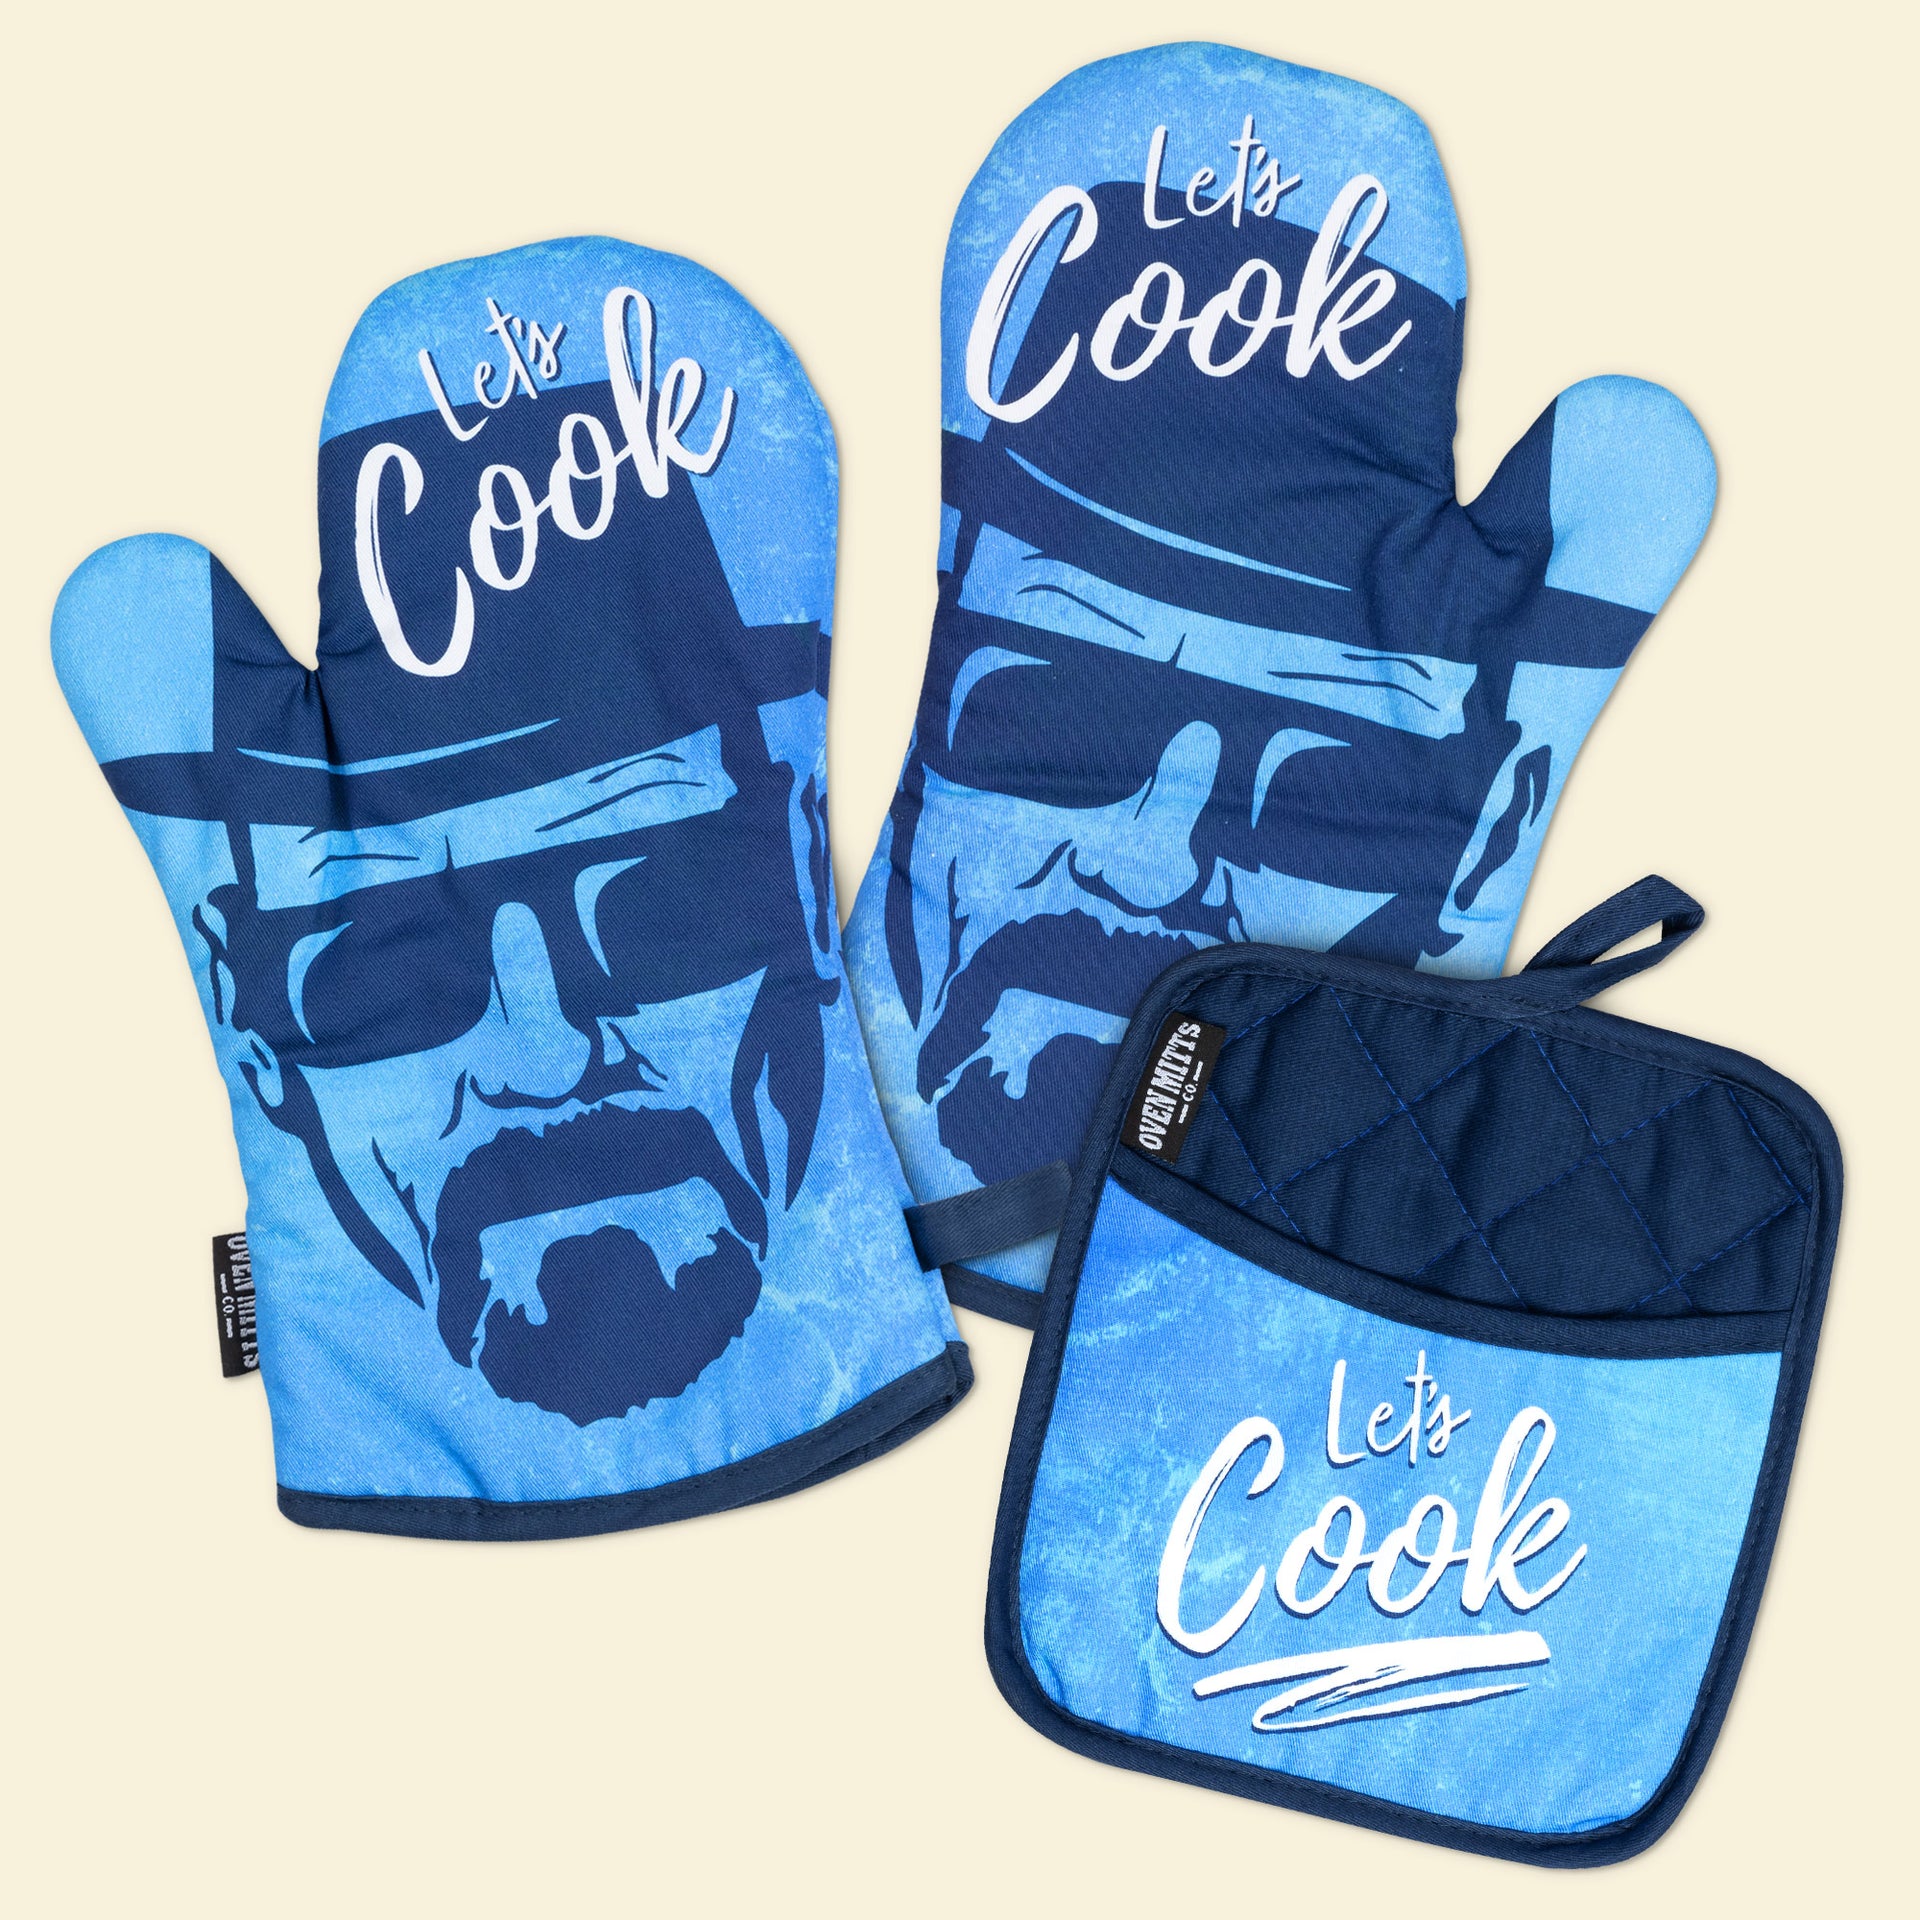 GROBRO7 6Pcs Funny Oven Mitts Pot Holders Set The Kitchen is The